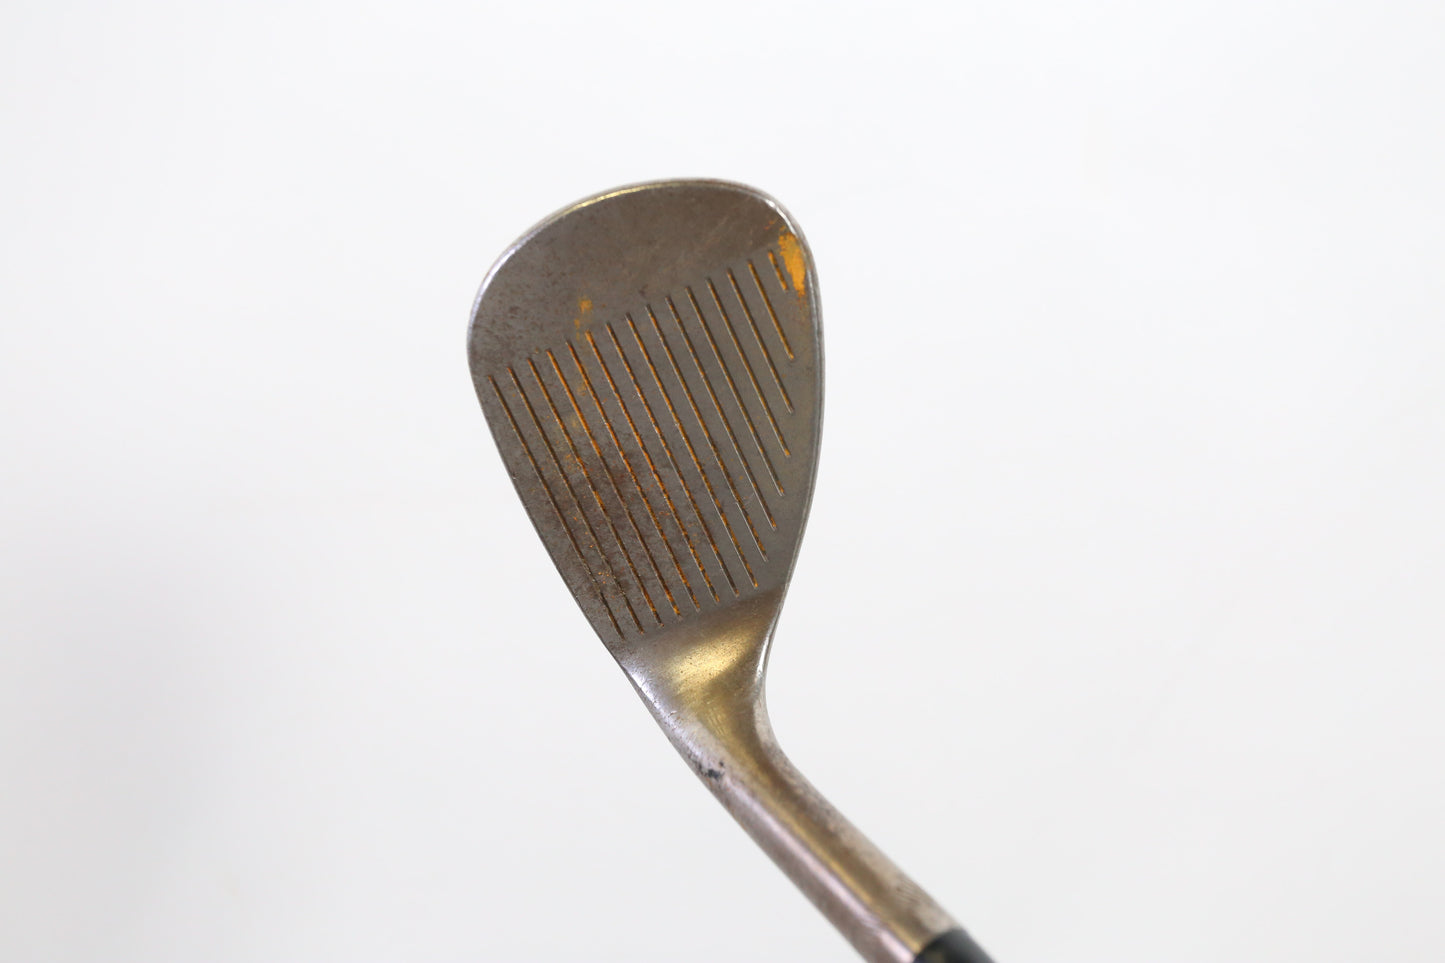 Used Titleist Vokey Spin Milled Oil Can Lob Wedge - Right-Handed - 60 Degrees - Stiff Flex